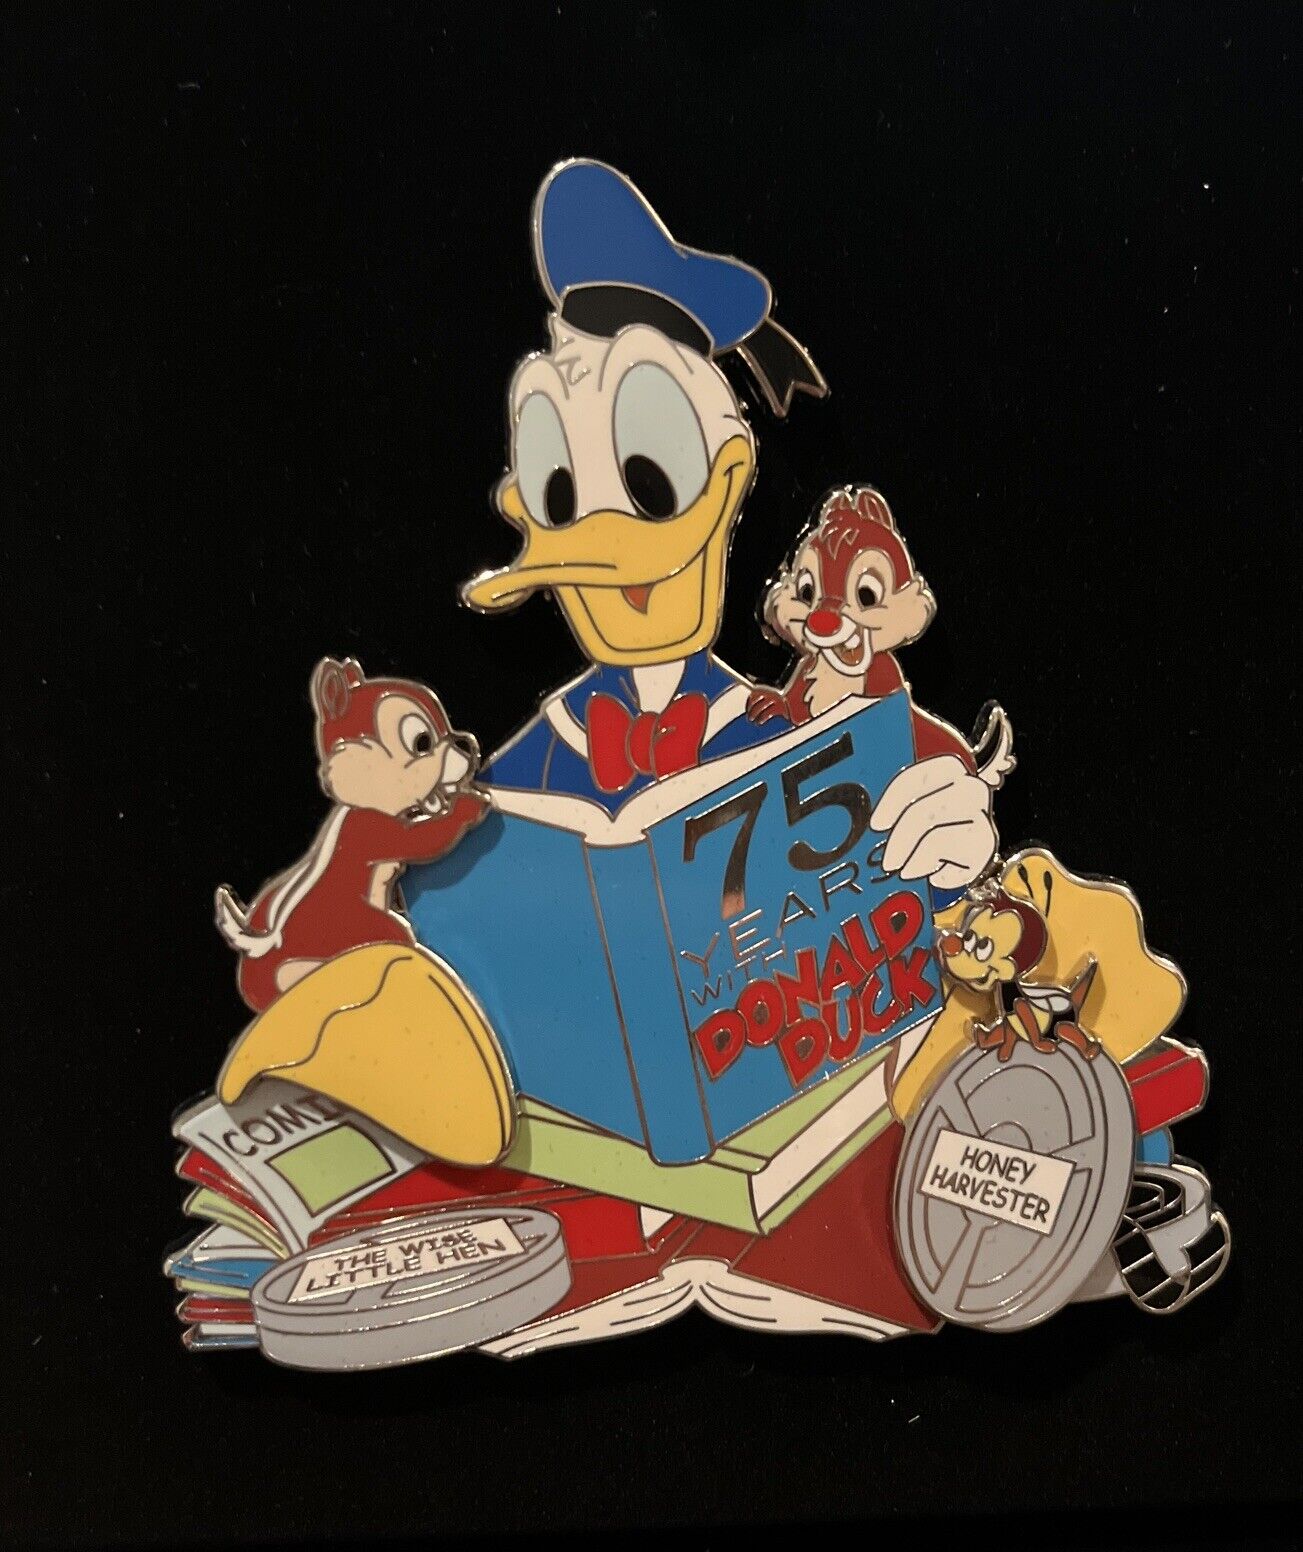 JUMBO DLR Disney Pin 2009 Featured Artist Donald Duck , Chip An Dale LE 500